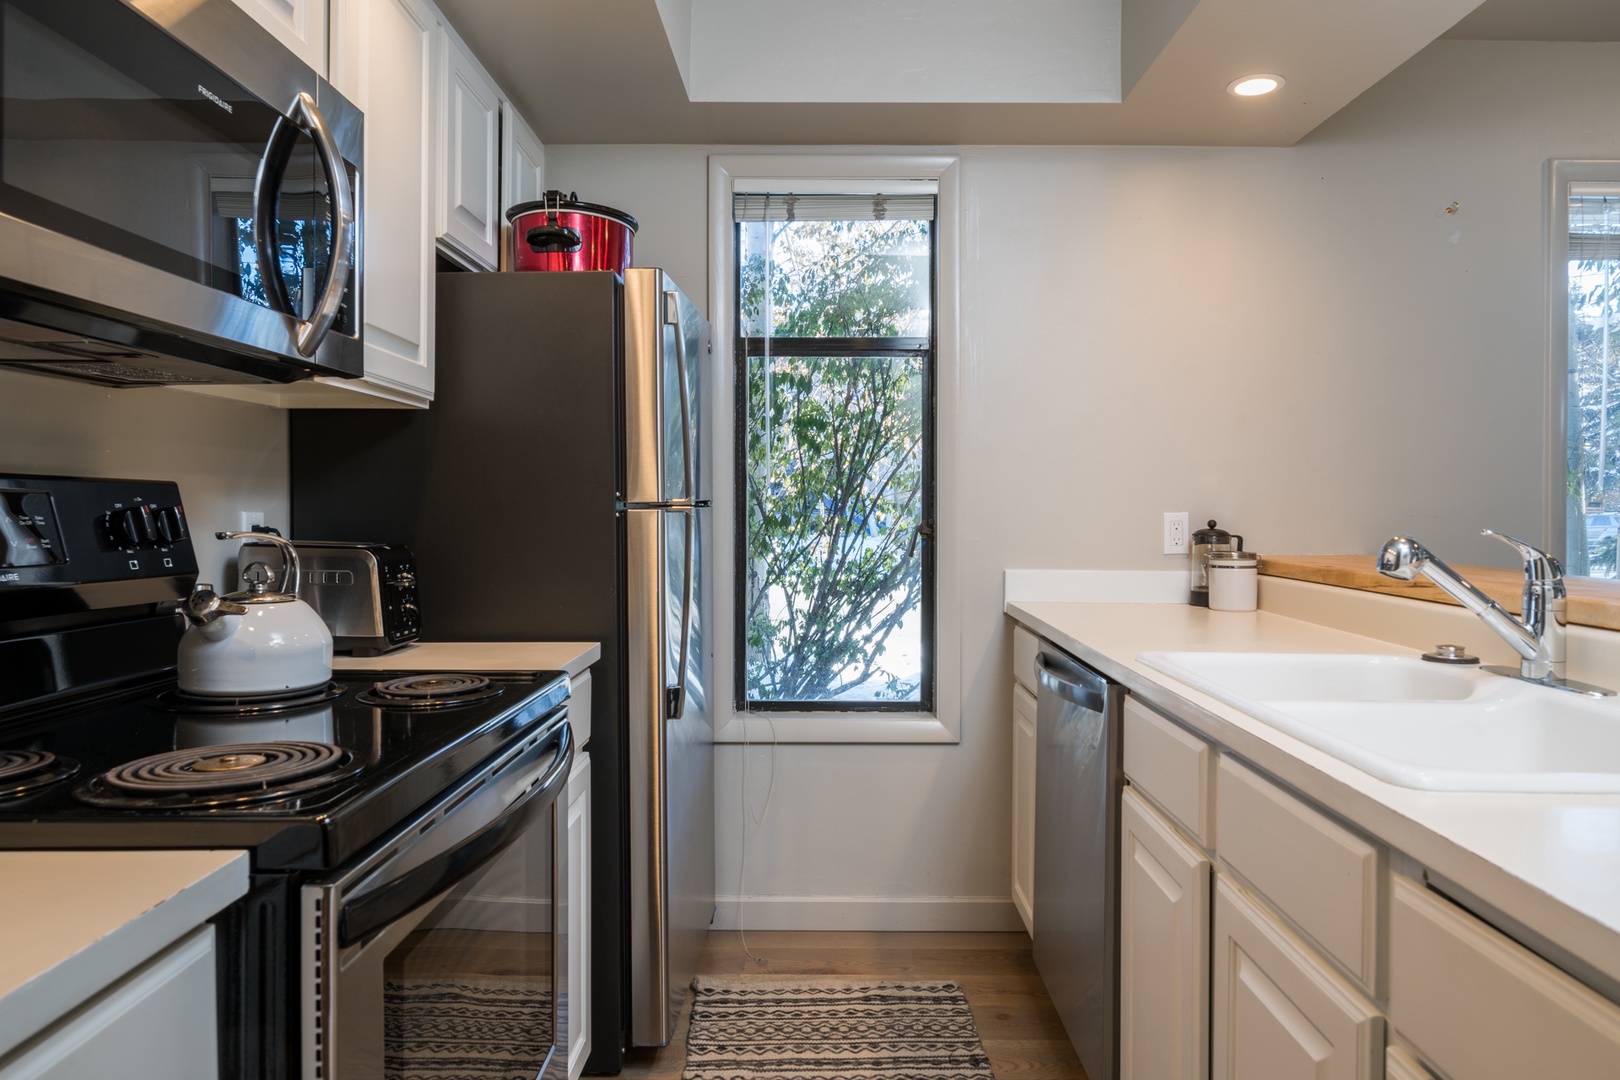 Ketchum Vacation Rentals, Town & Slopes - ully equipped kitchen for all your cooking needs, a pull-up bar, a dining nook, smart tv, and a fireplace.